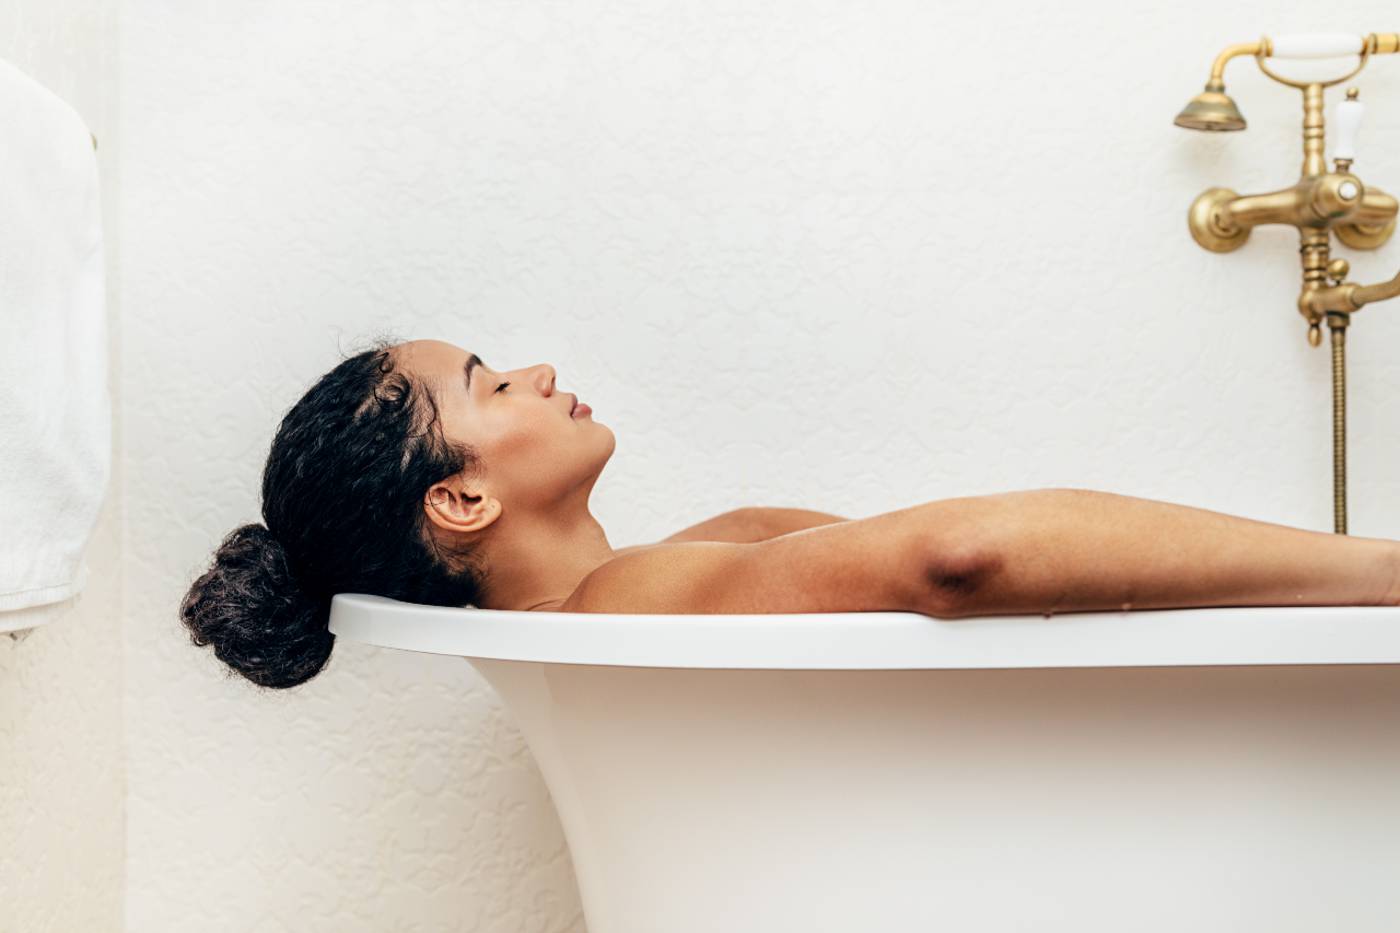 Baths While Pregnant: Can I Take a Bath While Pregnant? – Happiest Baby